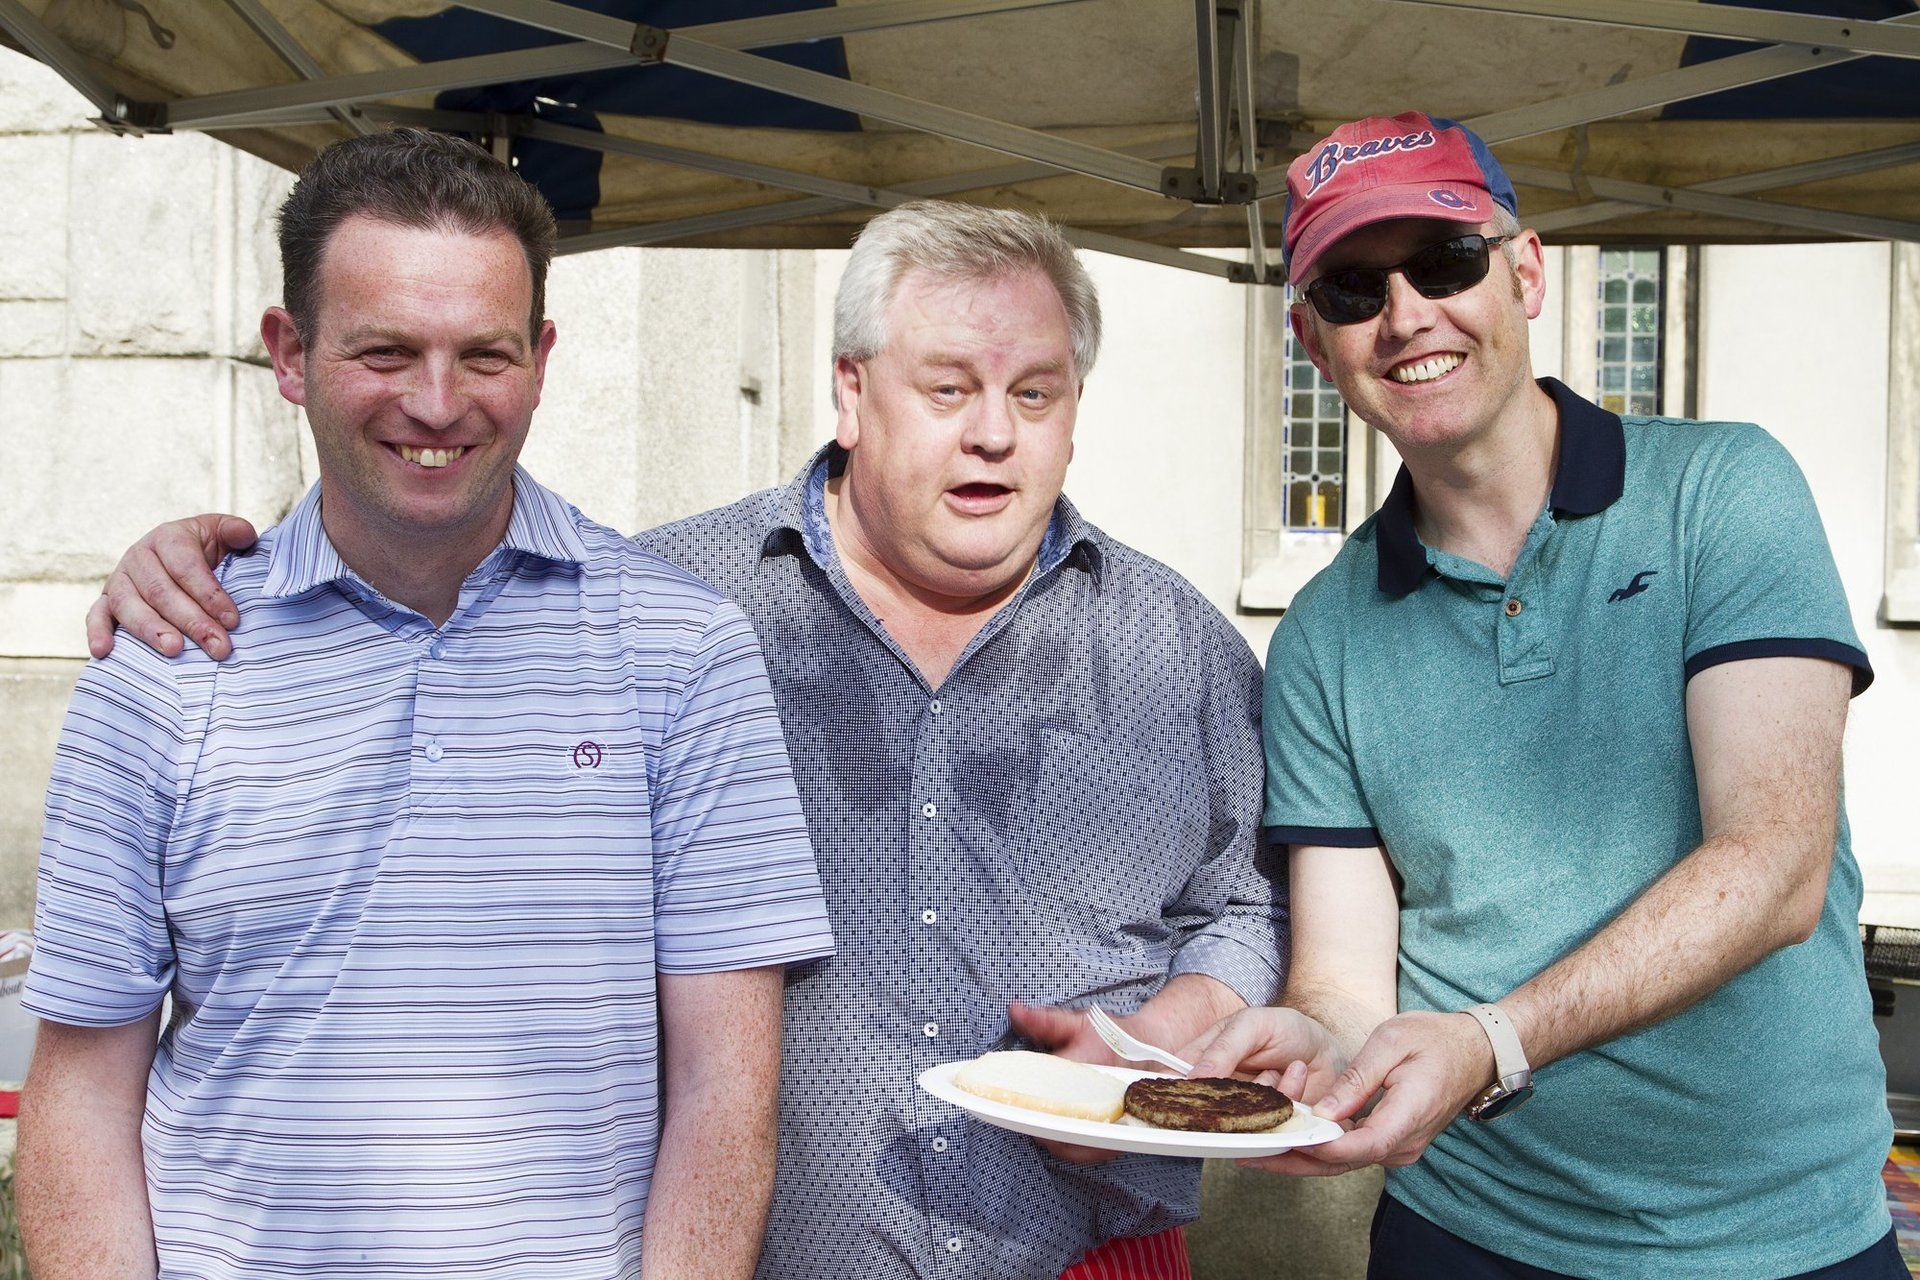 Three men are posing for a picture and one of them is holding a plate of food.